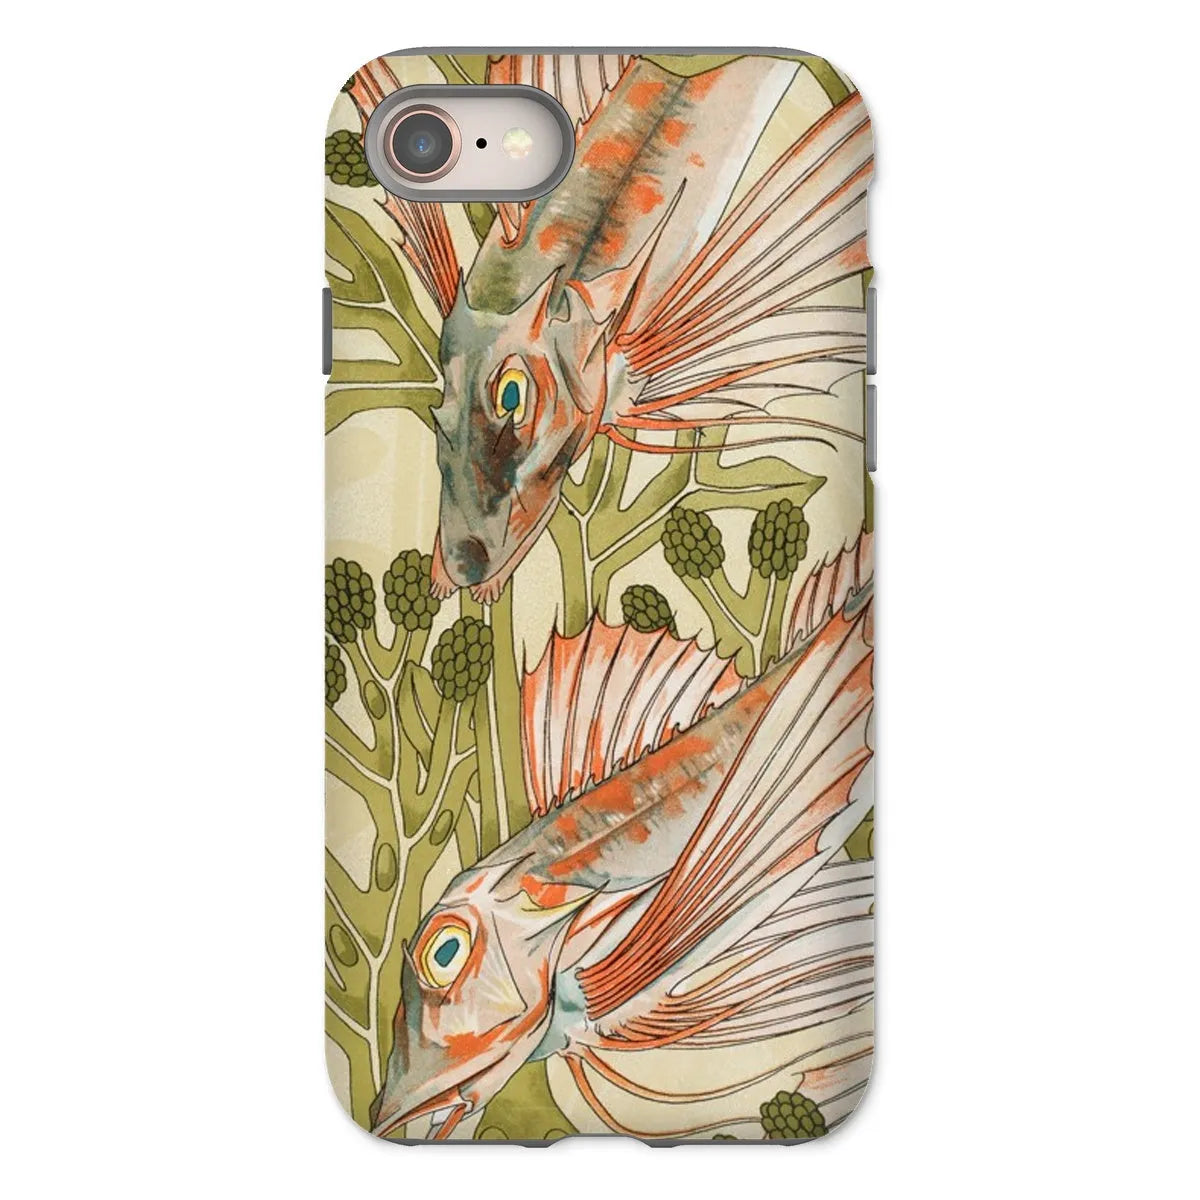 Red Fish - Animal Art Phone Case - Maurice Pillard Verneuil - Iphone 8 / Matte - Mobile Phone Cases - Aesthetic Art